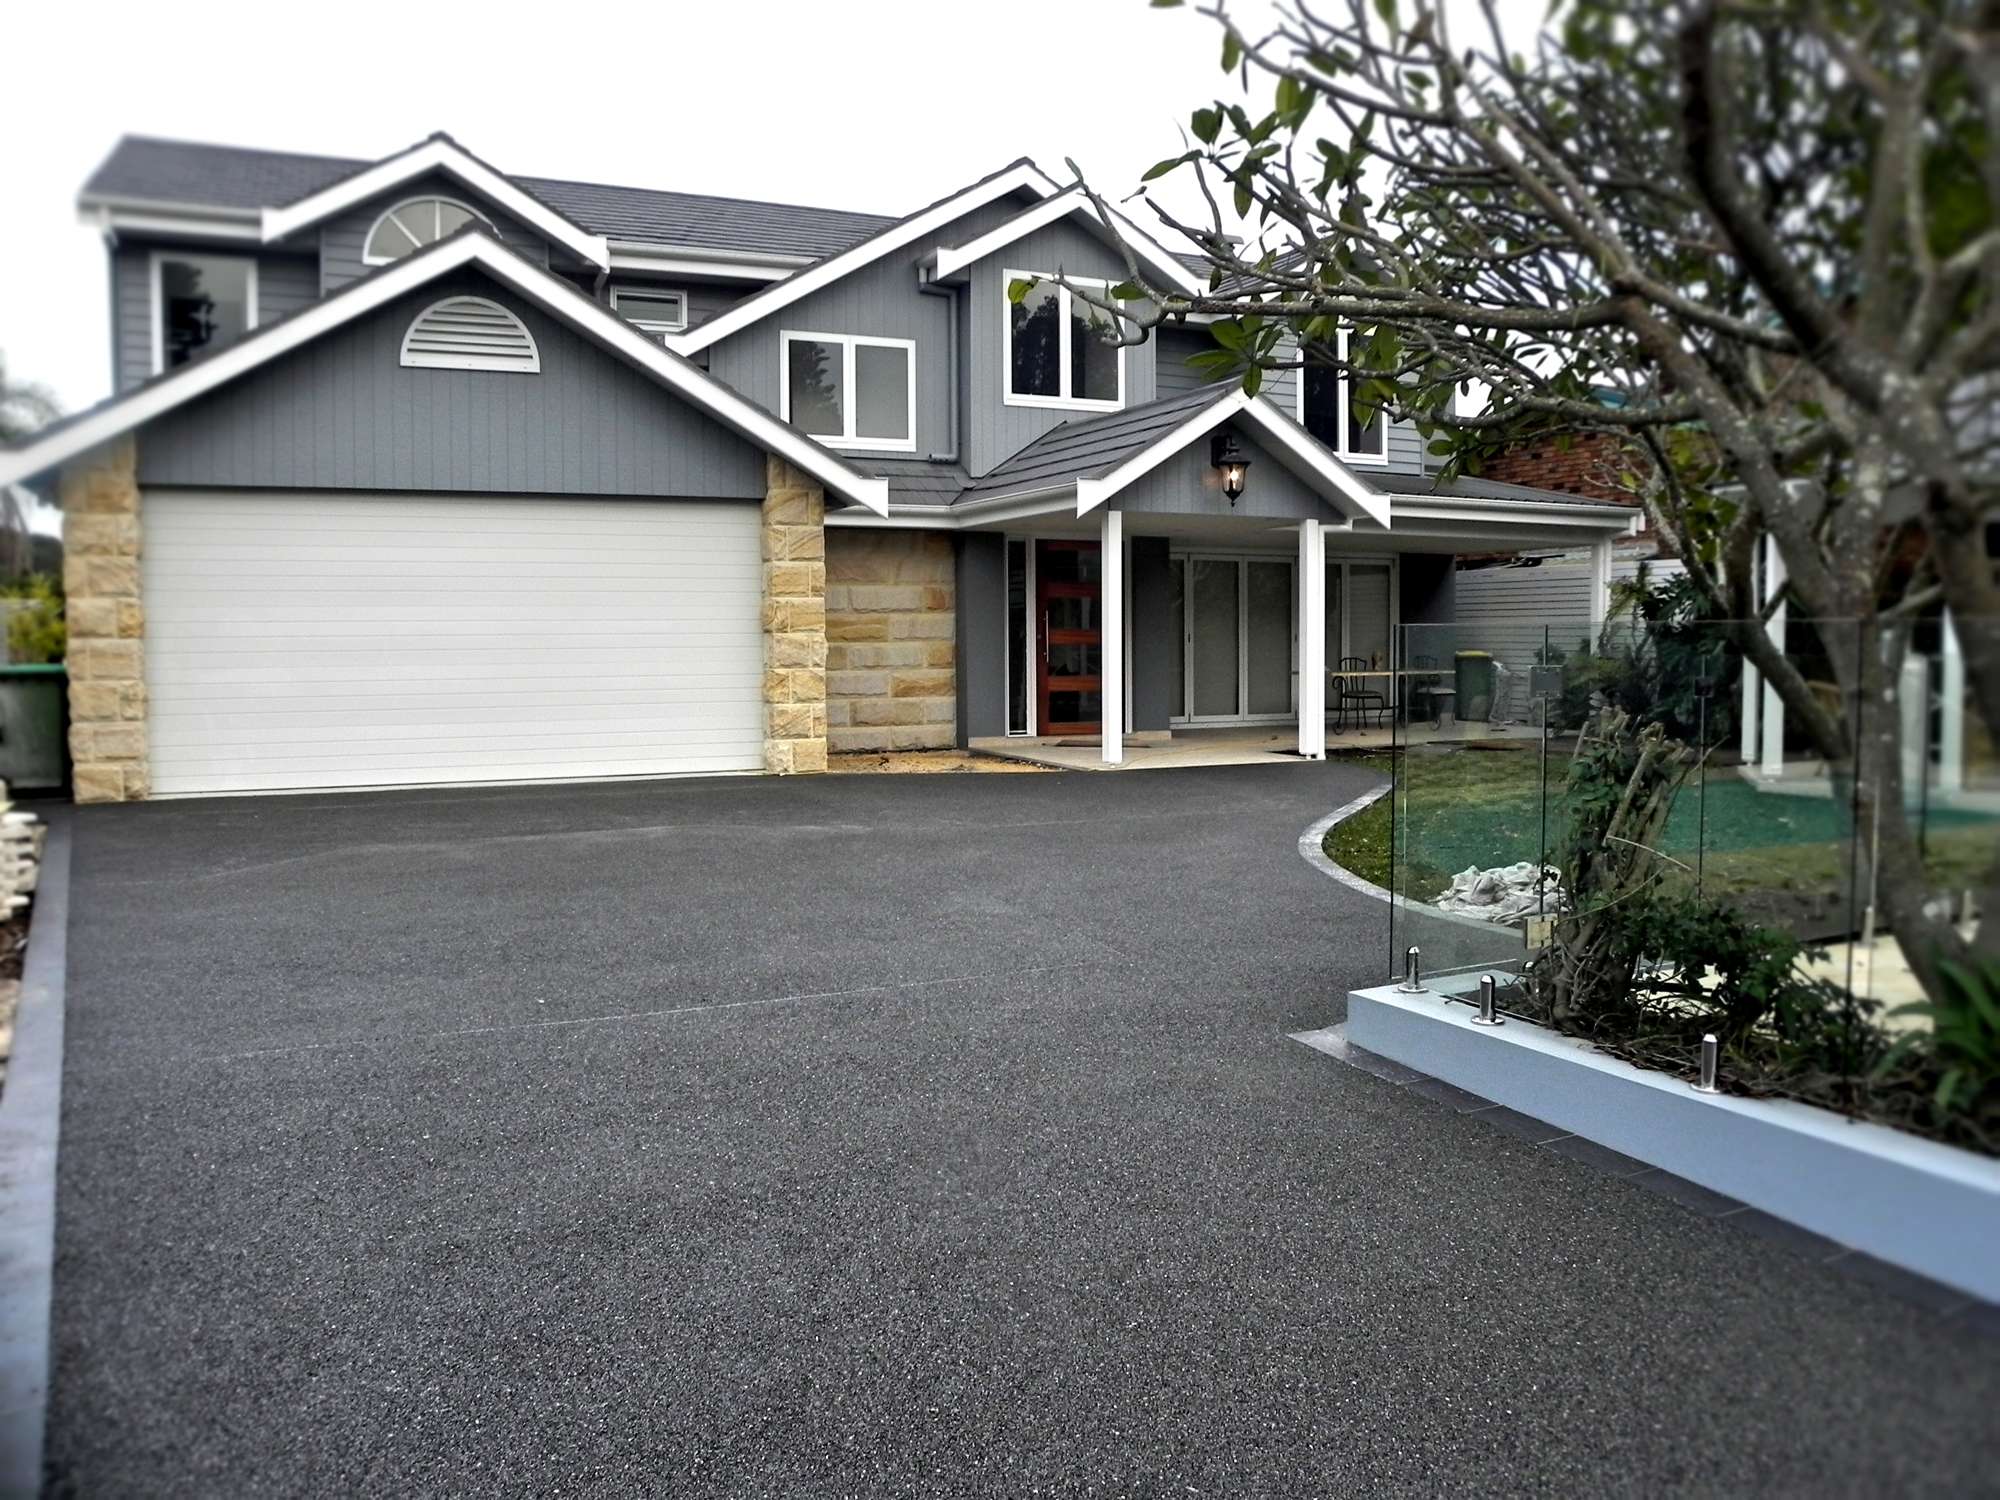 Modern-gray-house-with-a-matching-driveway-